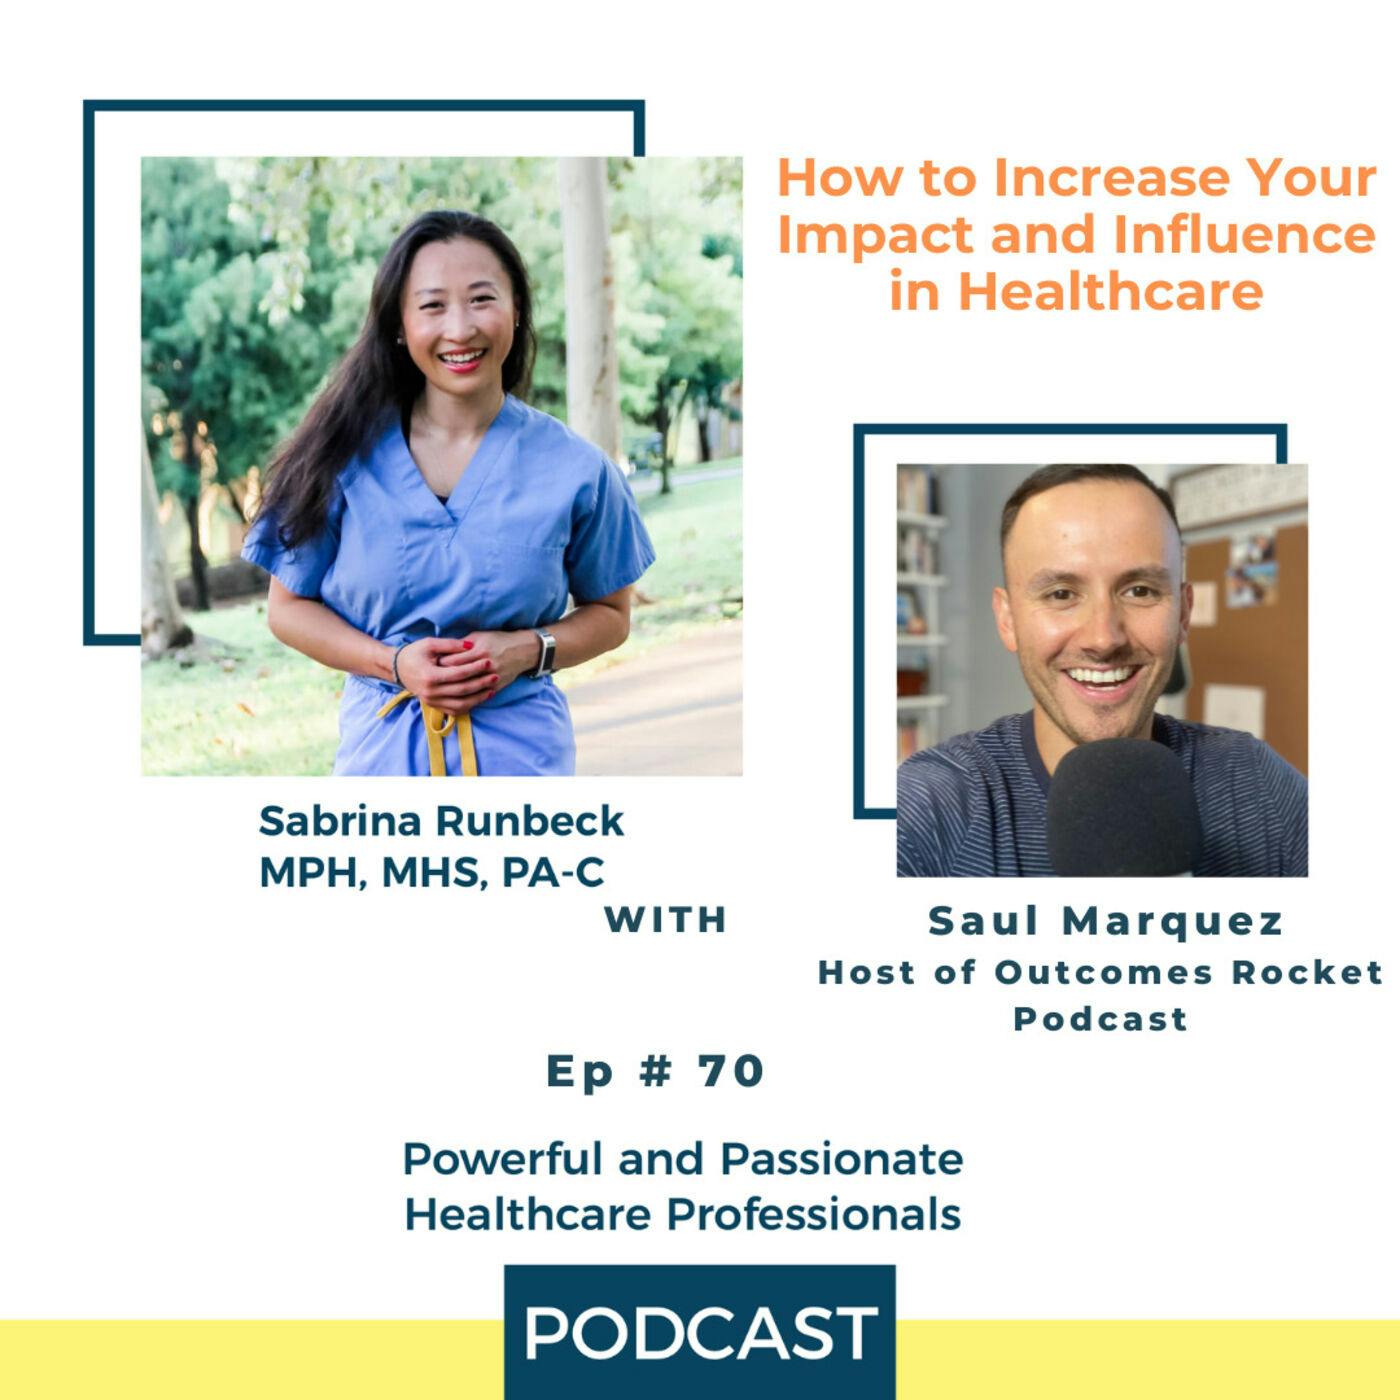 Ep 70 – How to Increase Your Impact and Influence in Healthcare with Saul Marquez